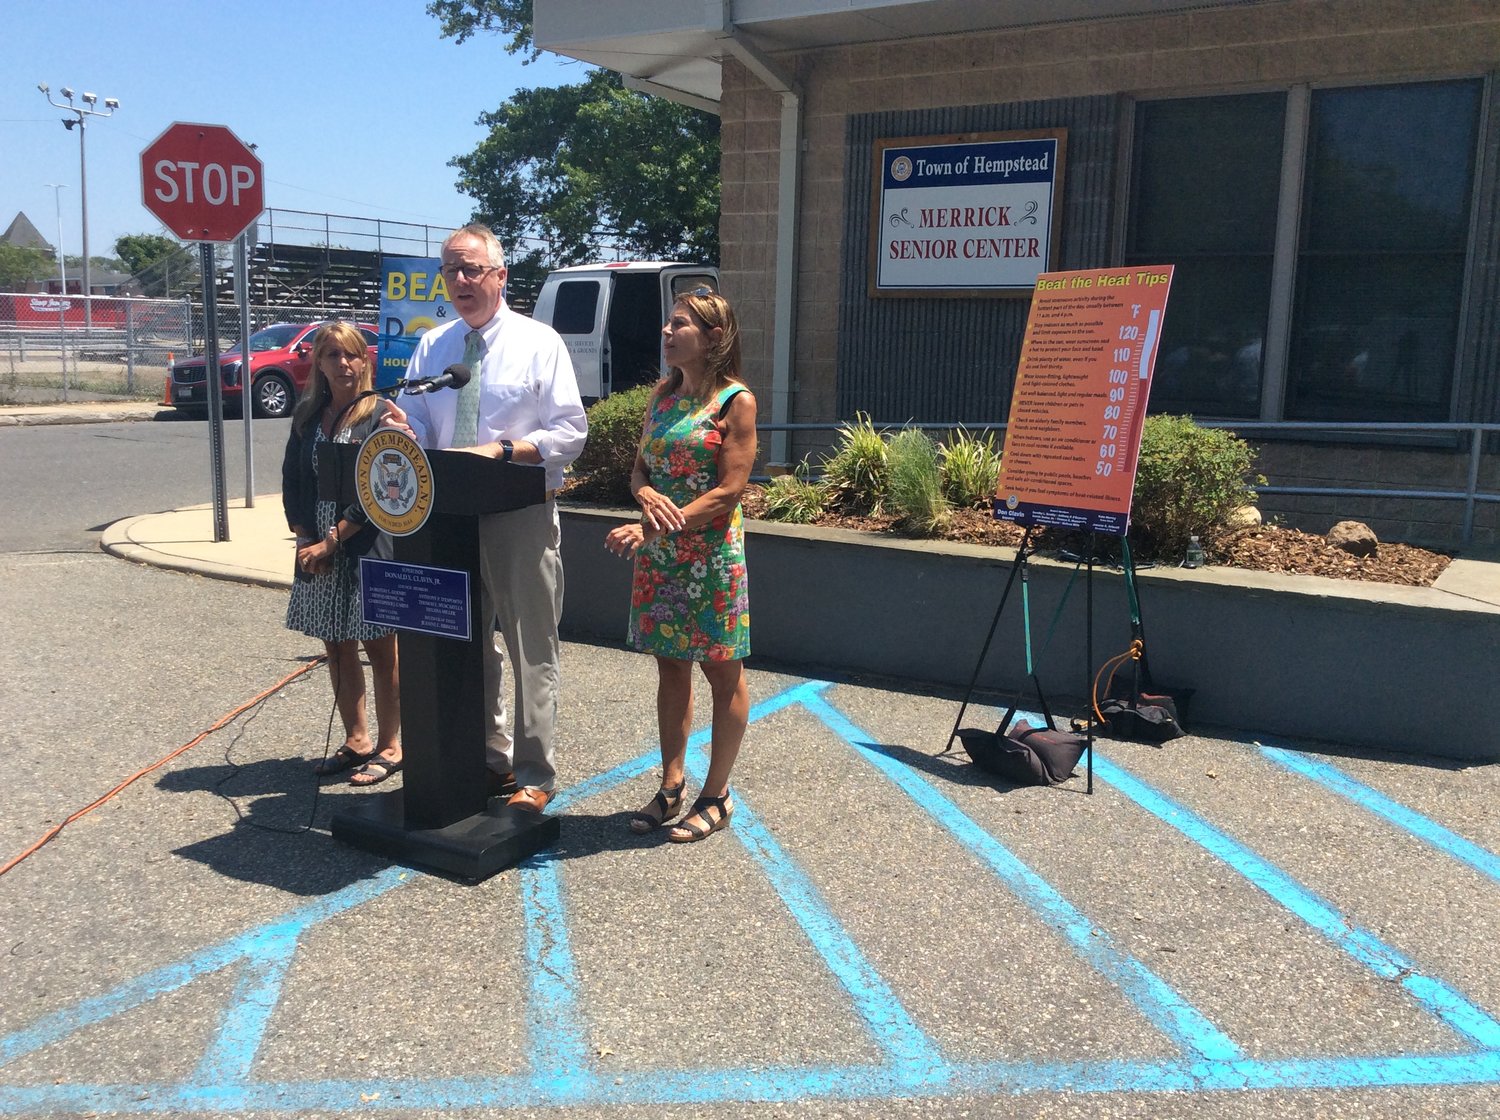 Clavin spoke on the importance of Town cooling centers, and gave updates on shark sightings at local beaches. Clavin noted that the increase in shark sightings is a concern that the Town and other areas on Long Island are monitoring closely. Life guards, he said, are properly trained to spot a dorsal fin, and keep residents safe.